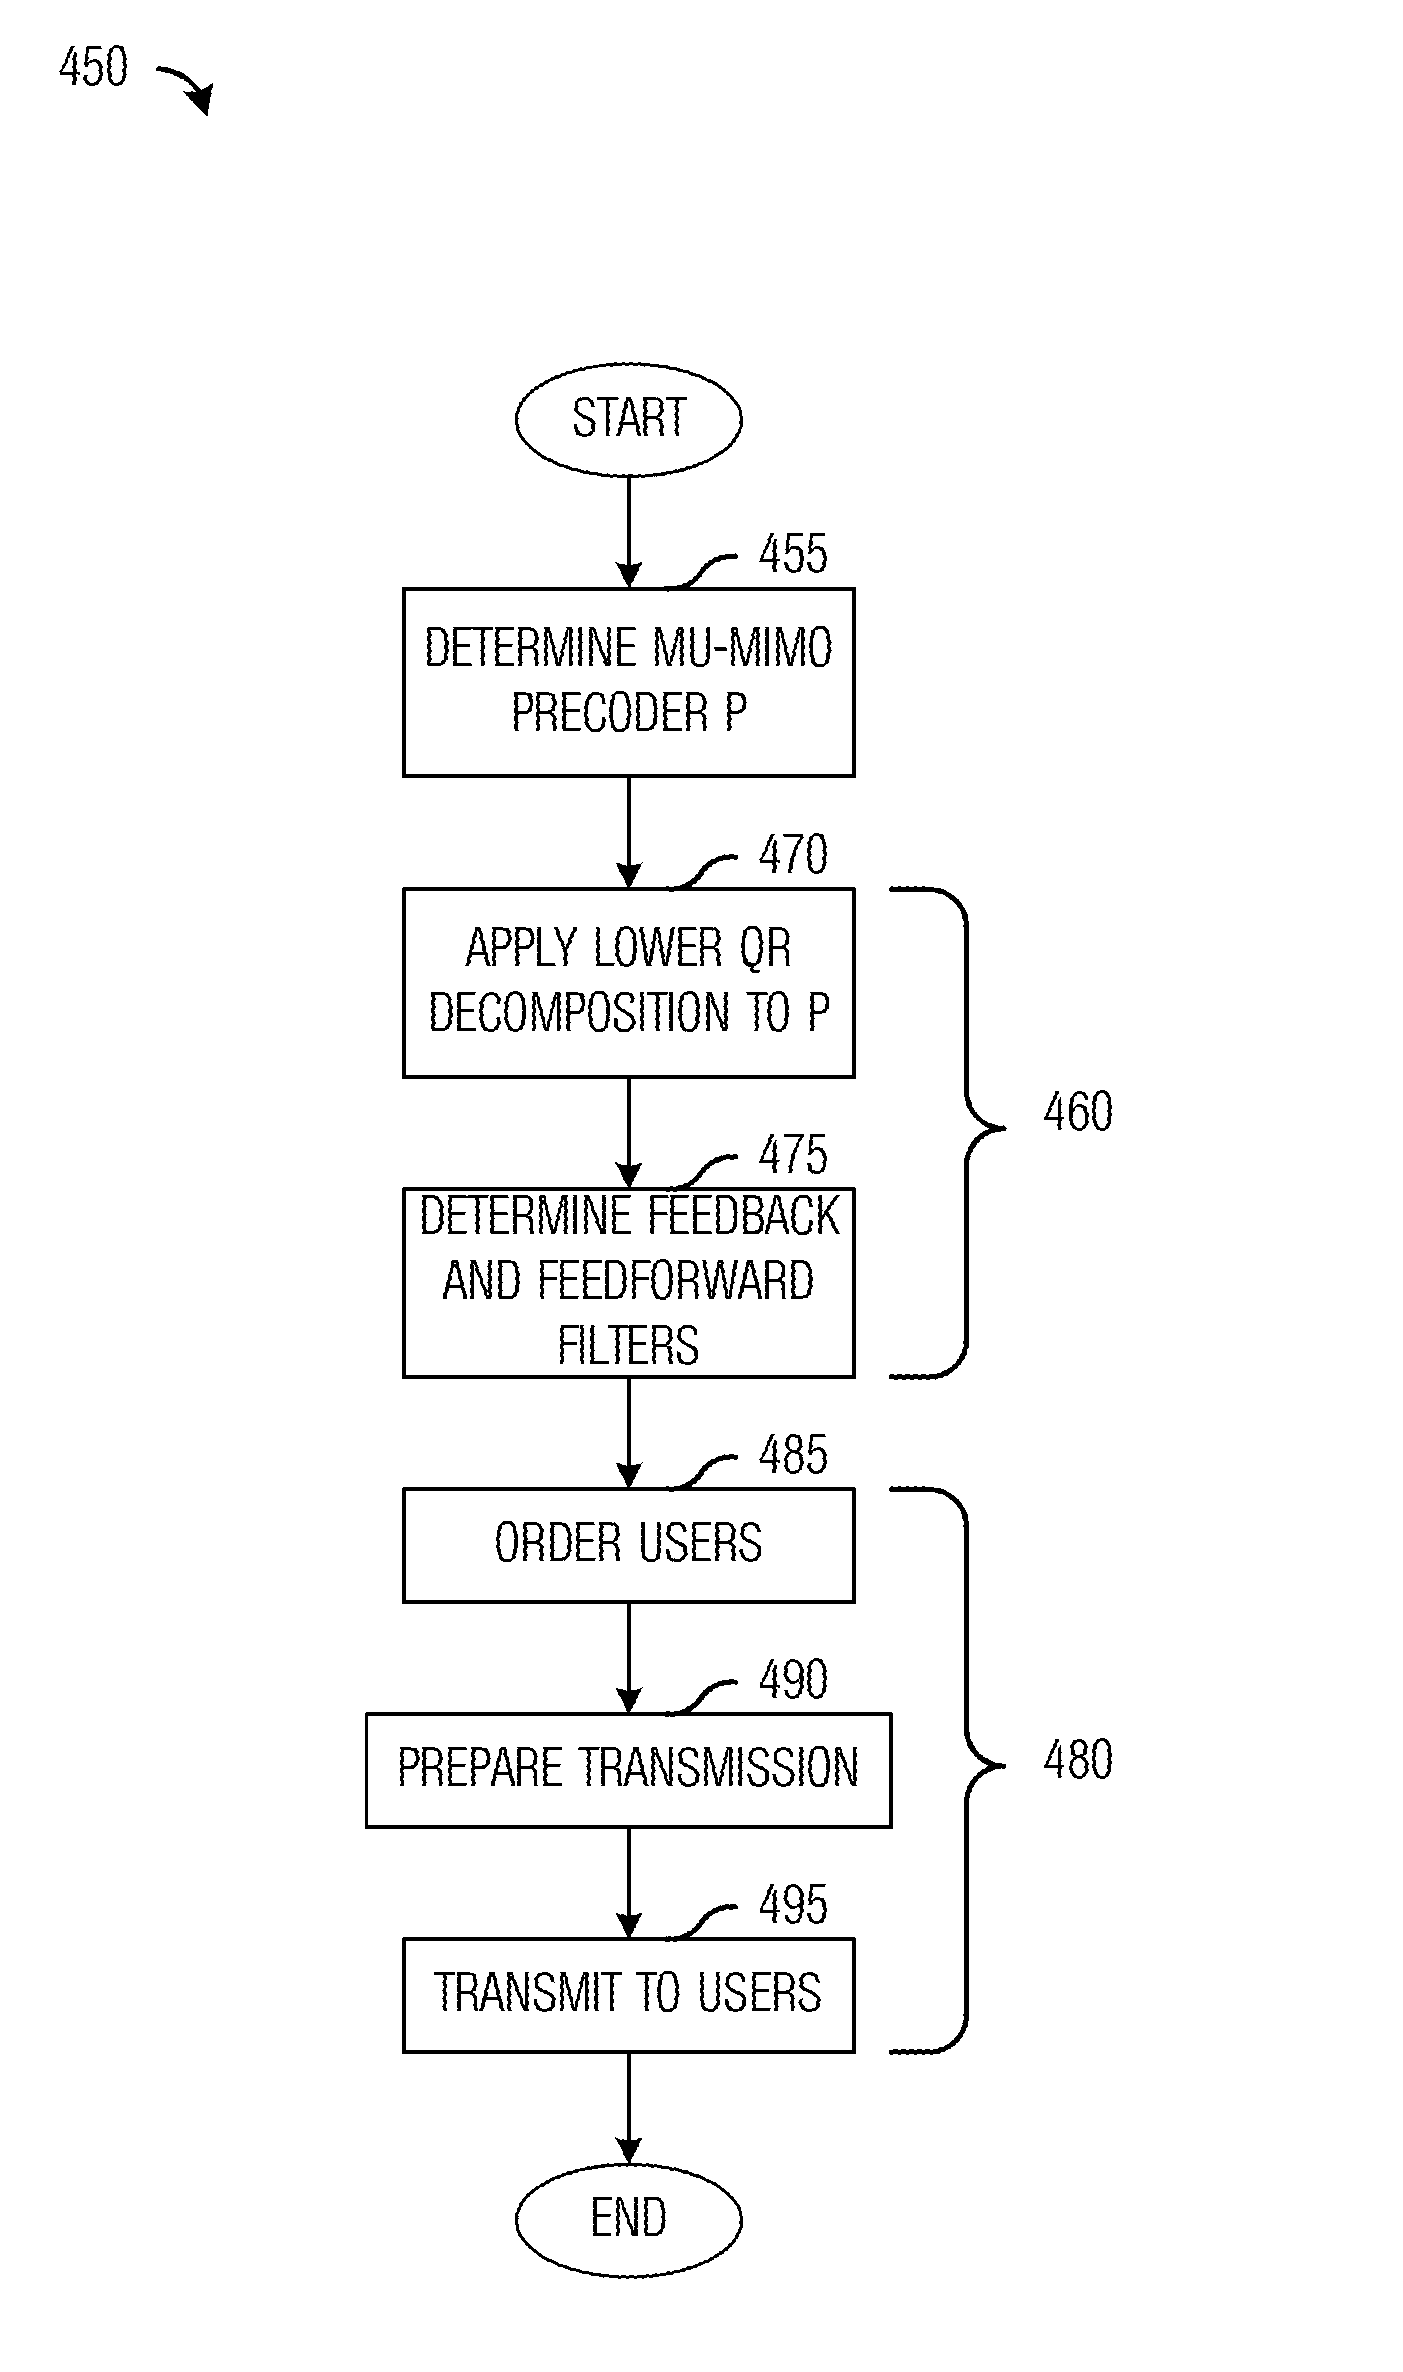 System and Method for Nonlinear MU-MIMO Downlink Channel Precoding with Arbitrary Precoder